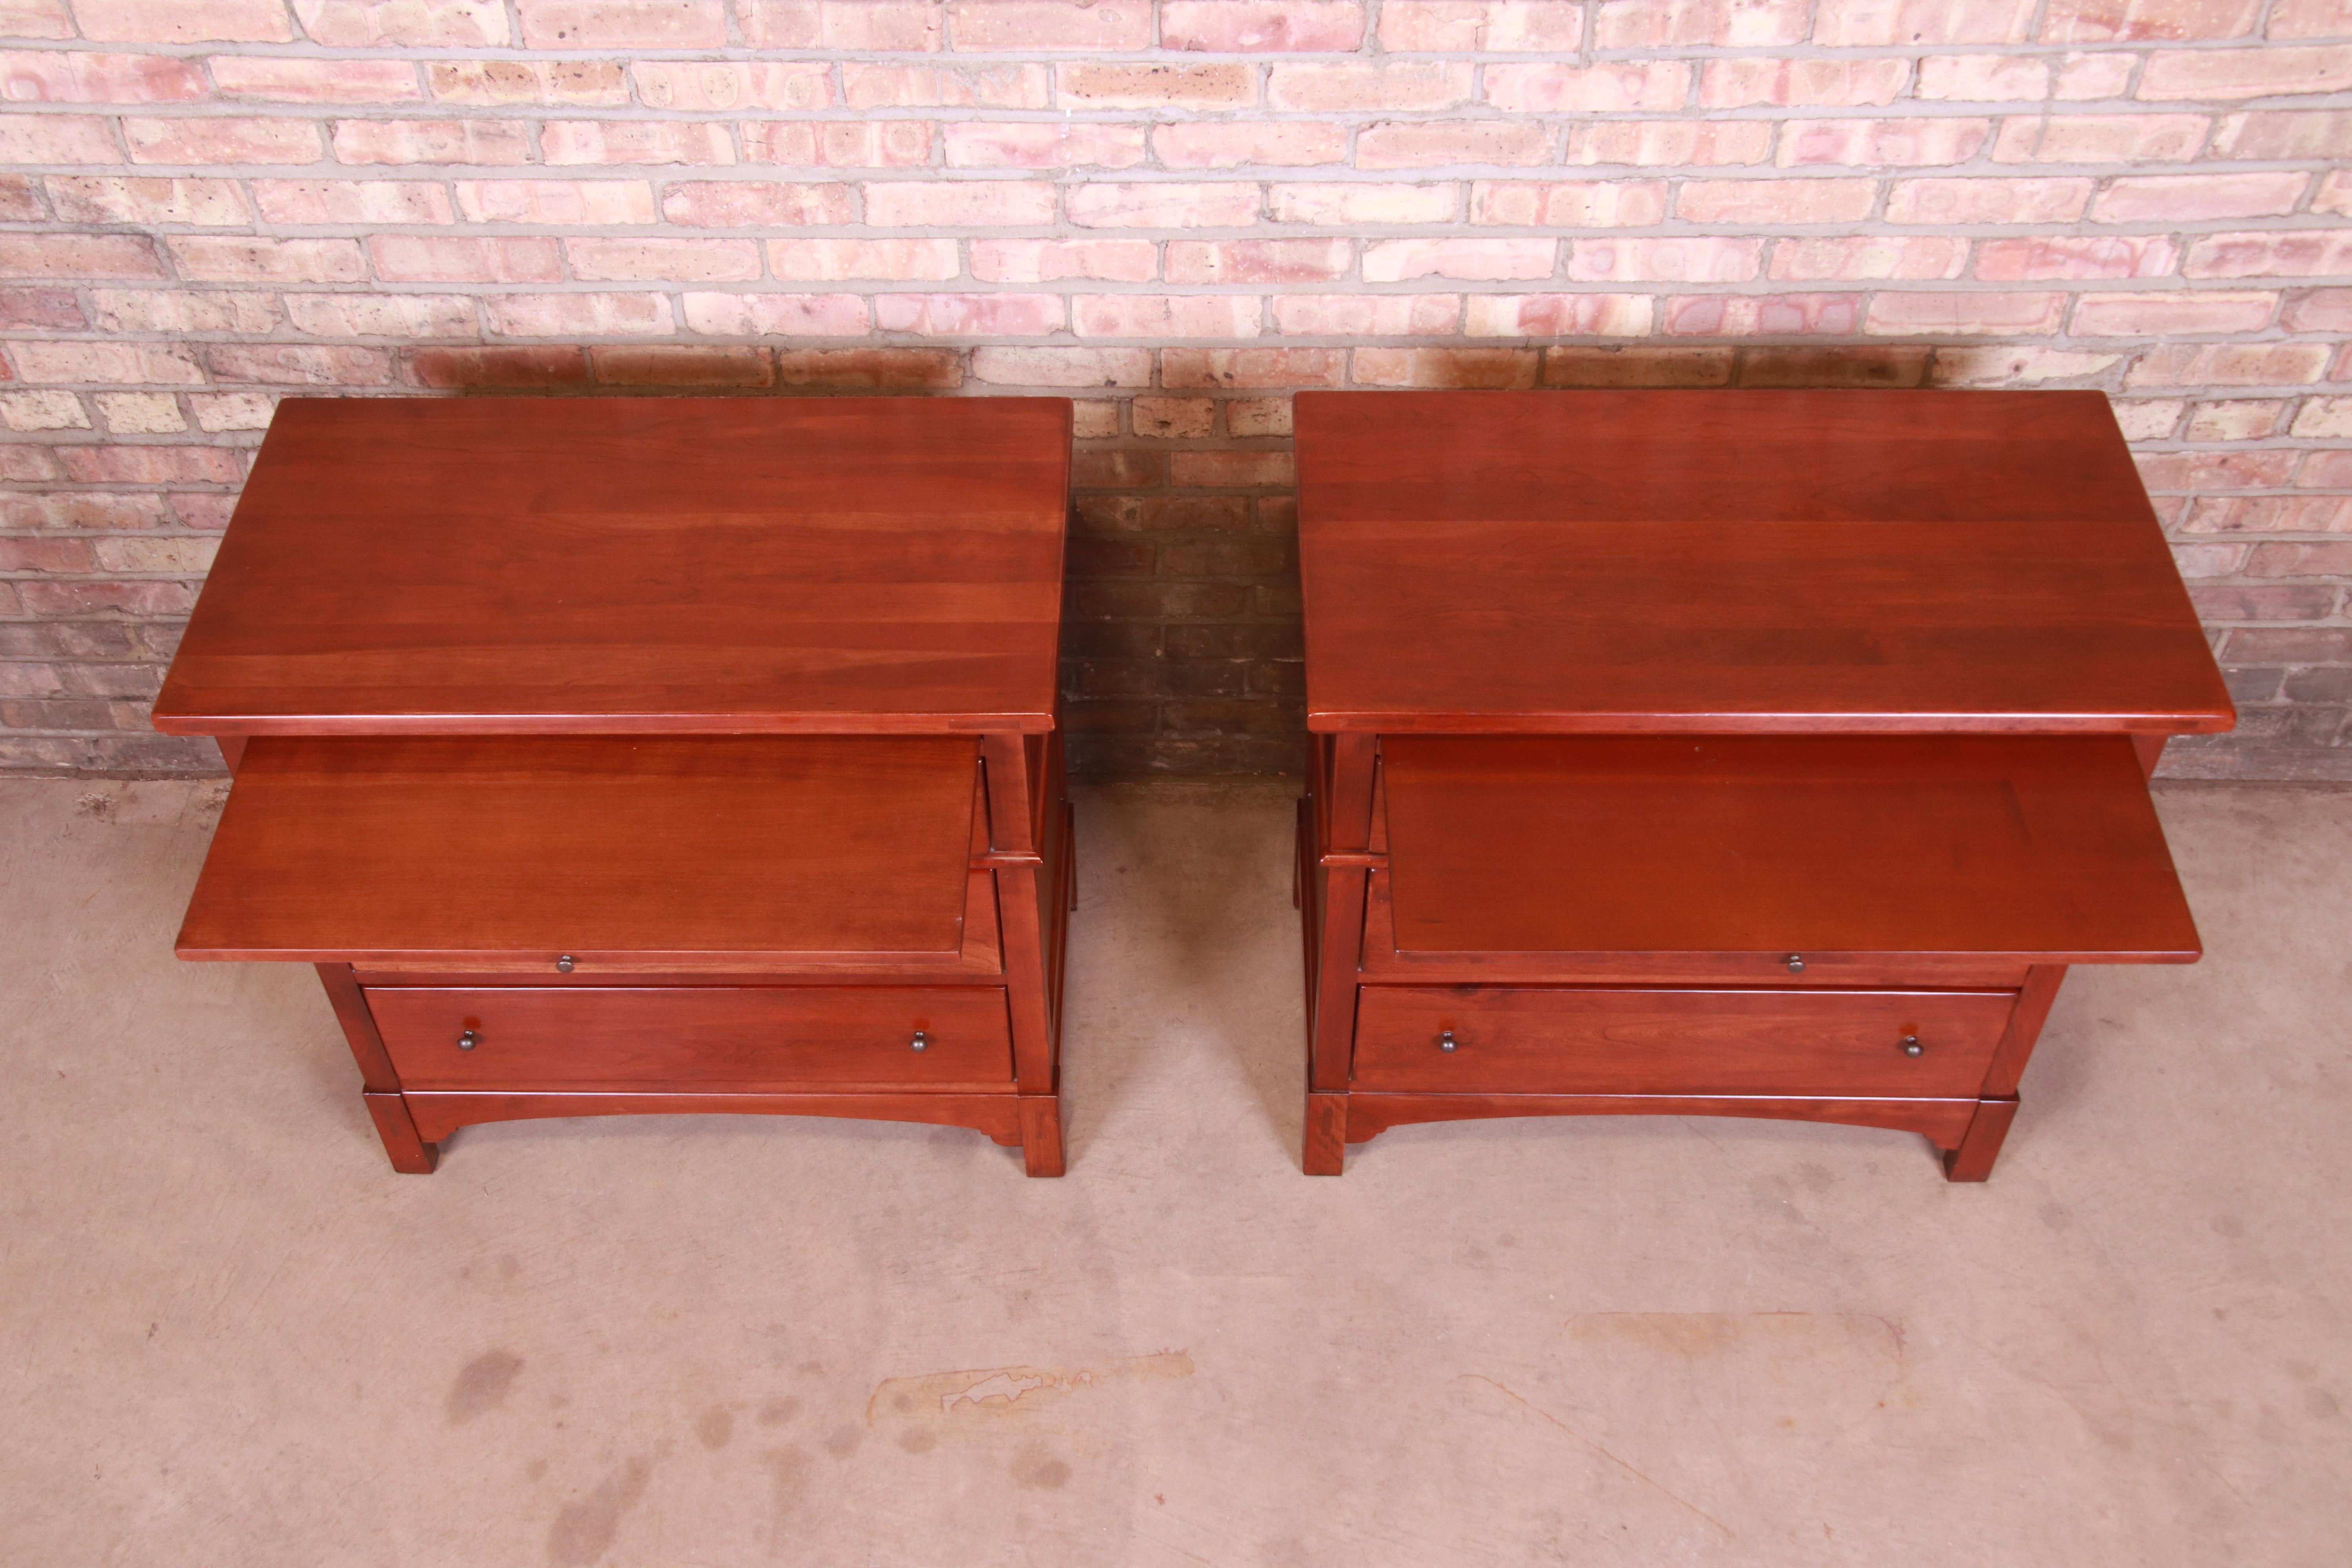 Stickley Style Arts & Crafts Cherrywood Nightstands or Bachelor Chests, Pair 4